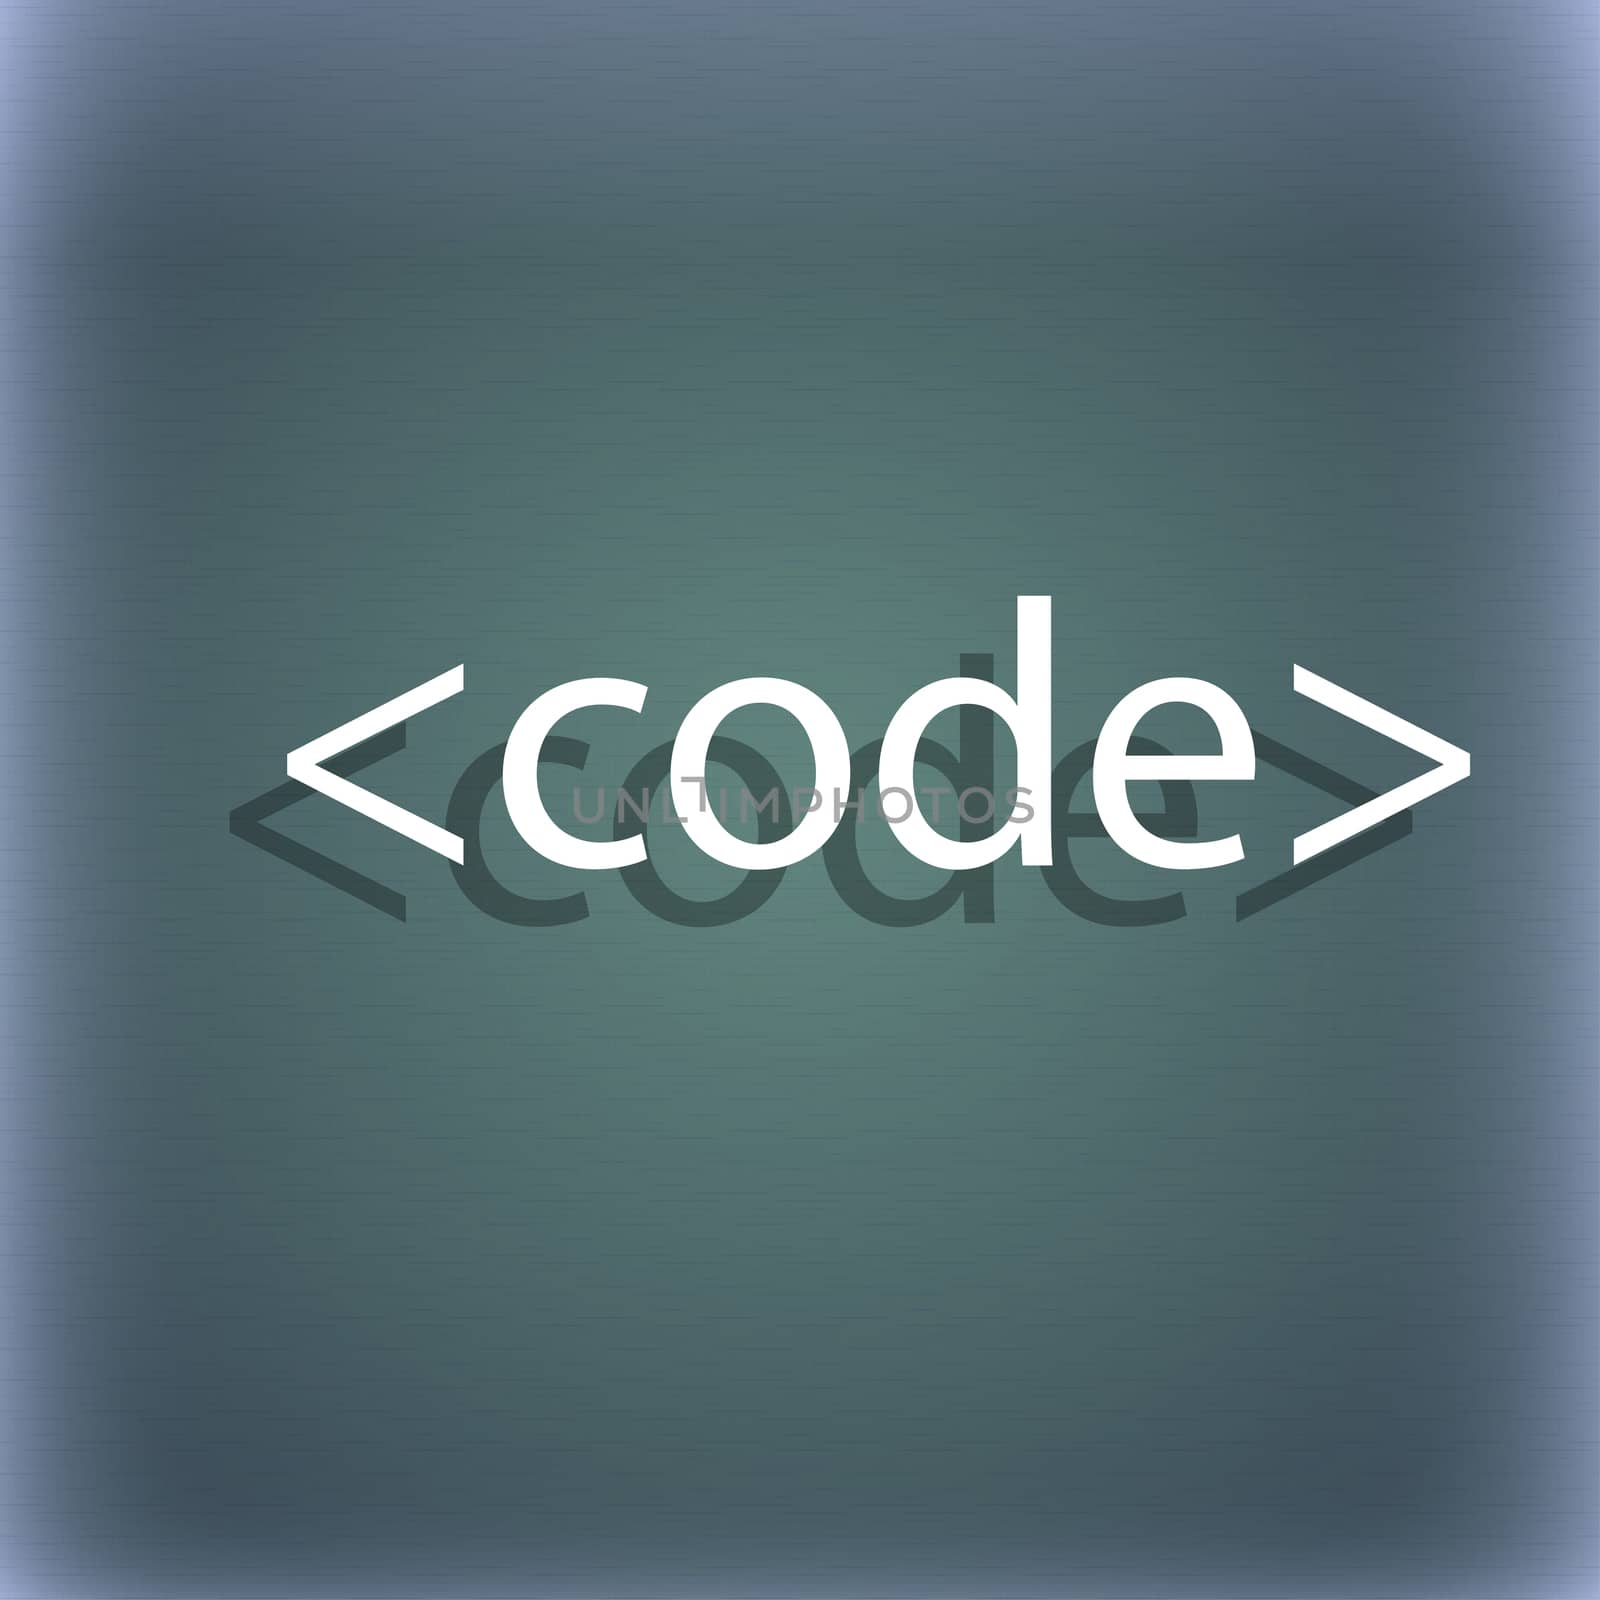 Code sign icon. Programming language symbol. On the blue-green abstract background with shadow and space for your text. illustration